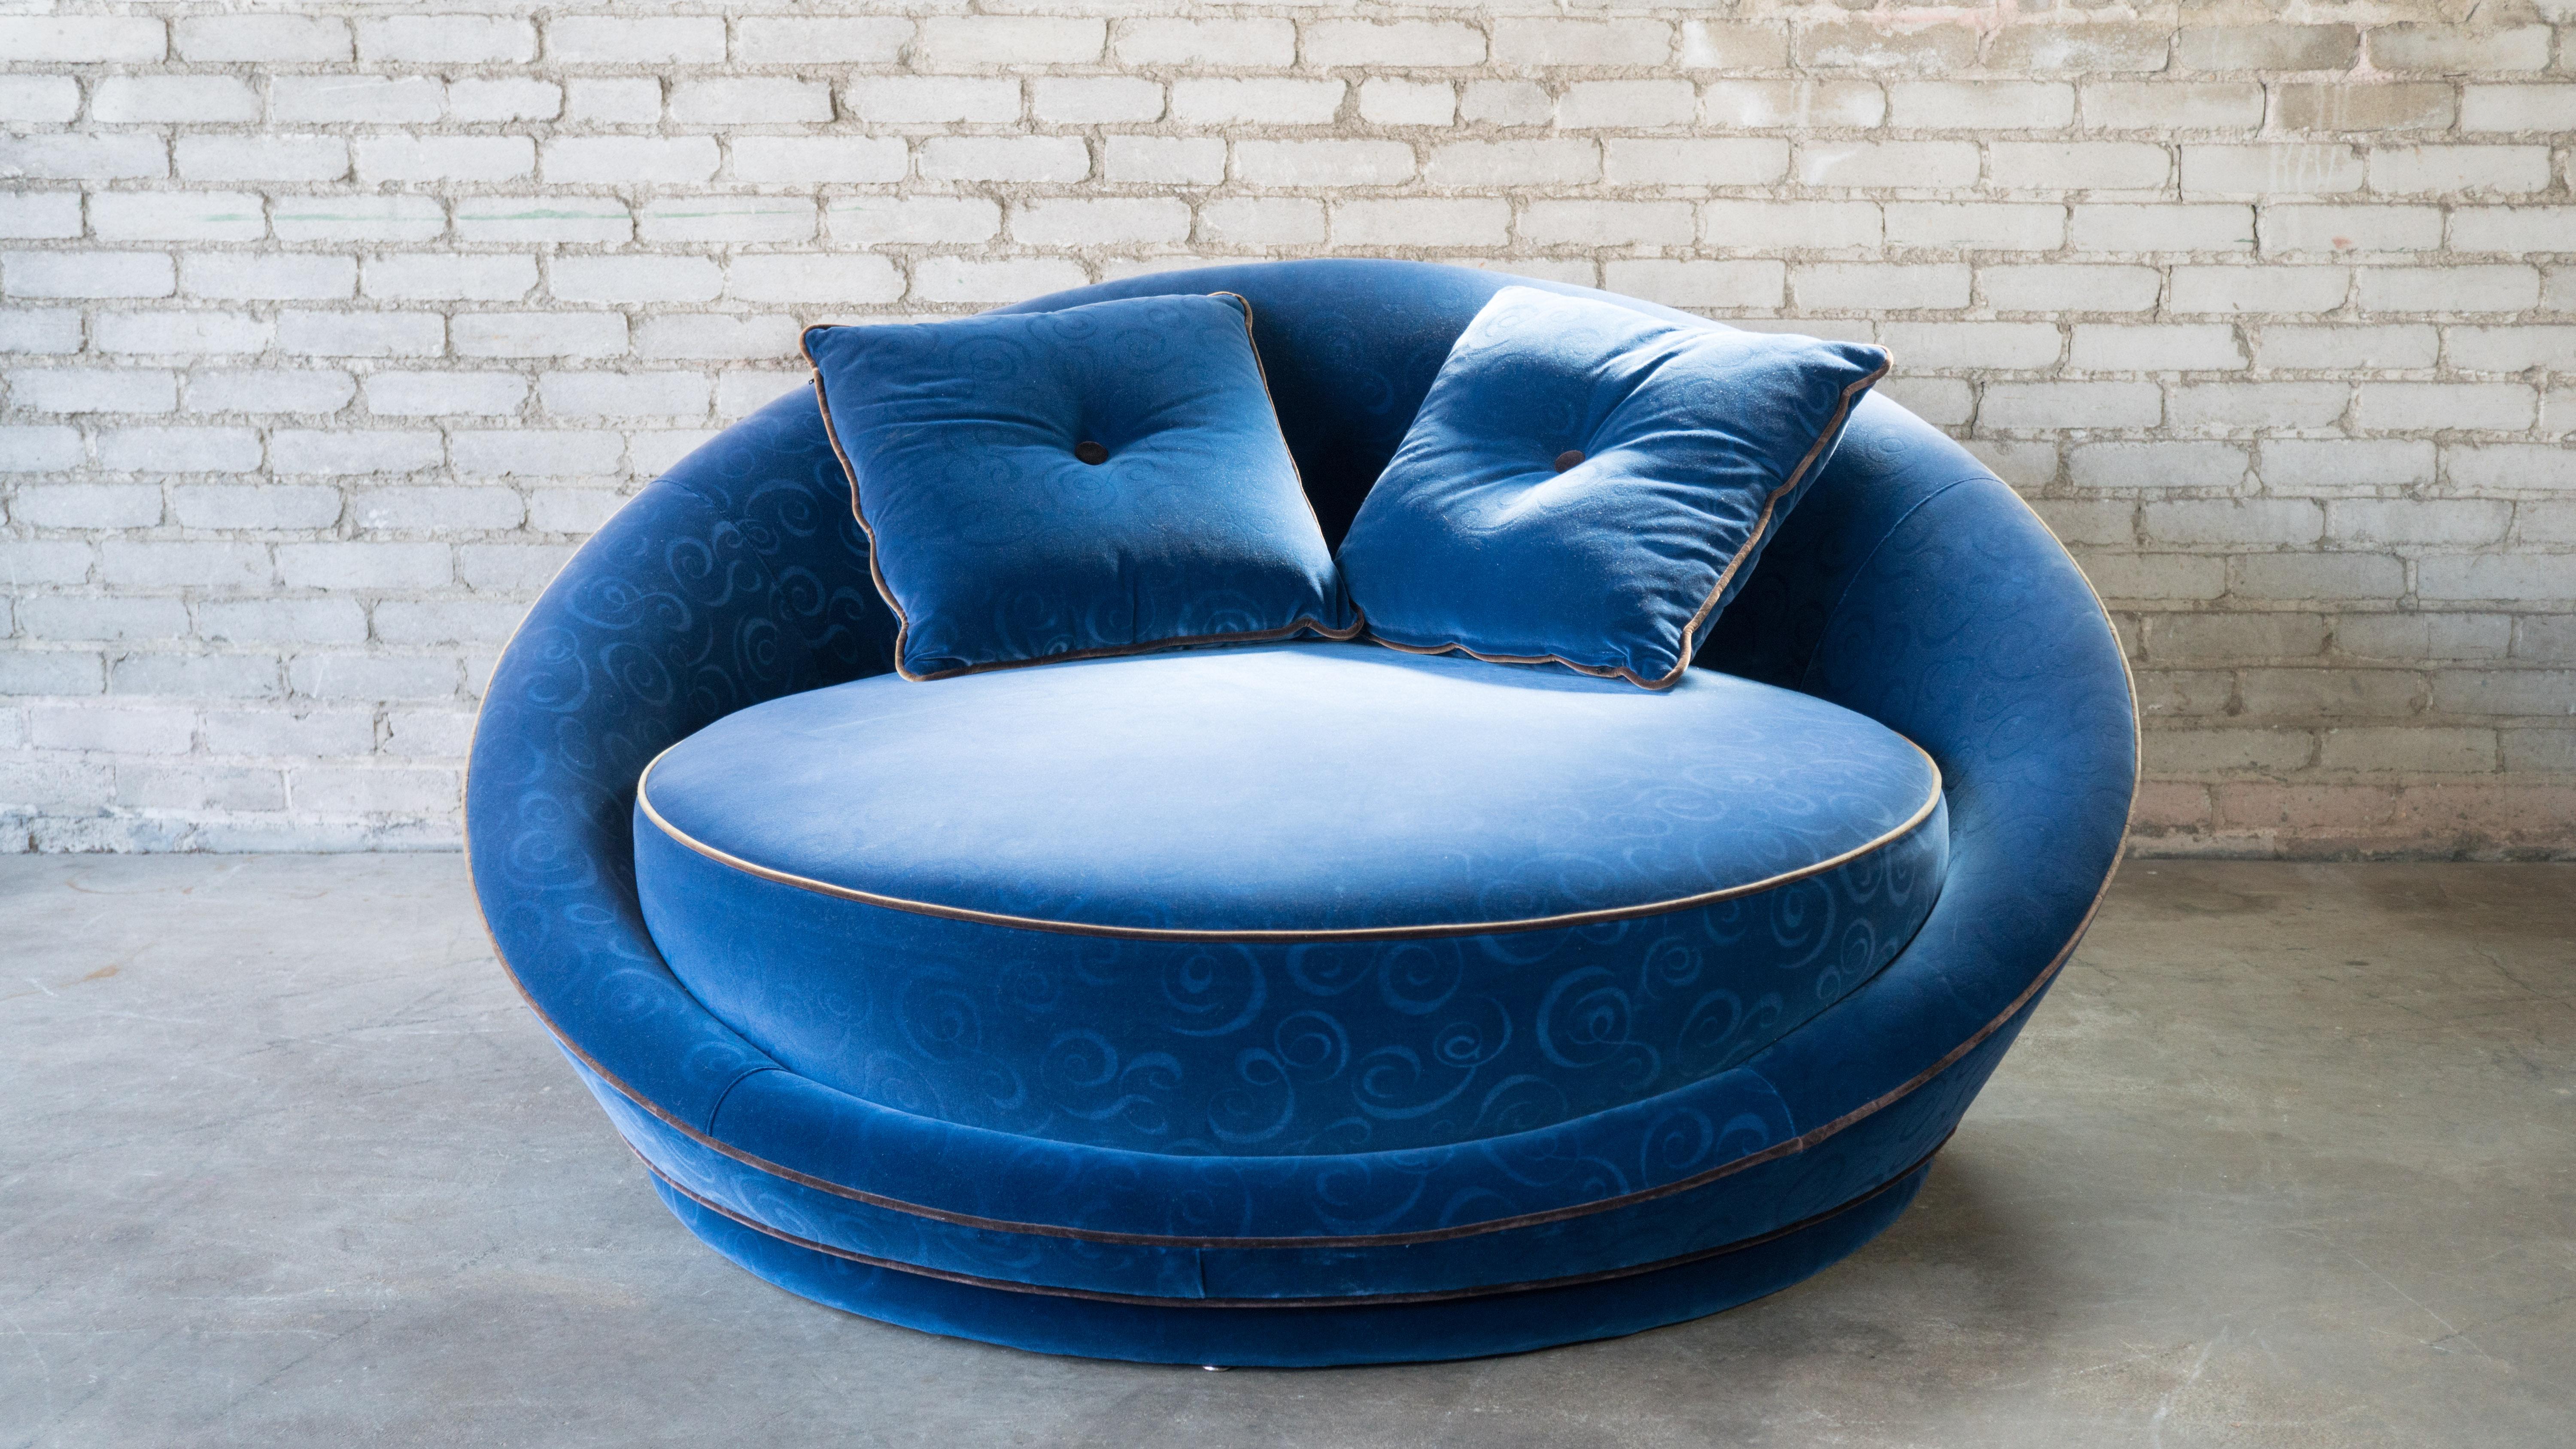 Milo Baughman Satellite chaise lounge chair, circa 1970s. Reupholstered in blue velvet with ornate design and gold piping. Two matching pillows. Fabric plinth platform base. Deep seating, low profile design, excellent lines and curves. Great